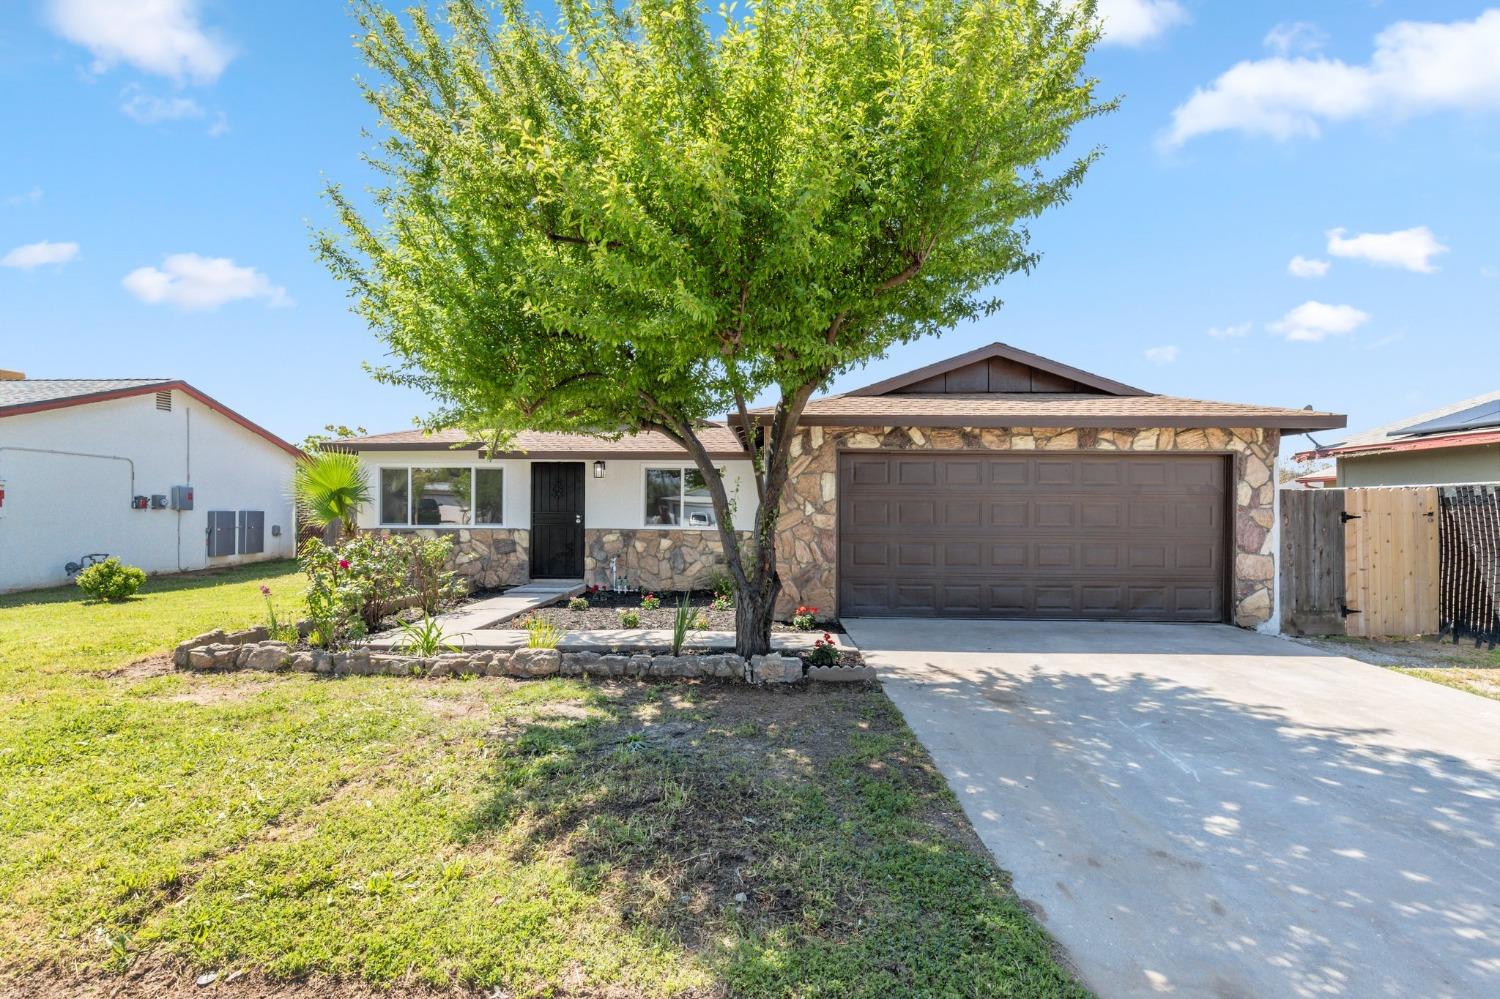 Photo of 1527 W Hawes Ave in Fresno, CA